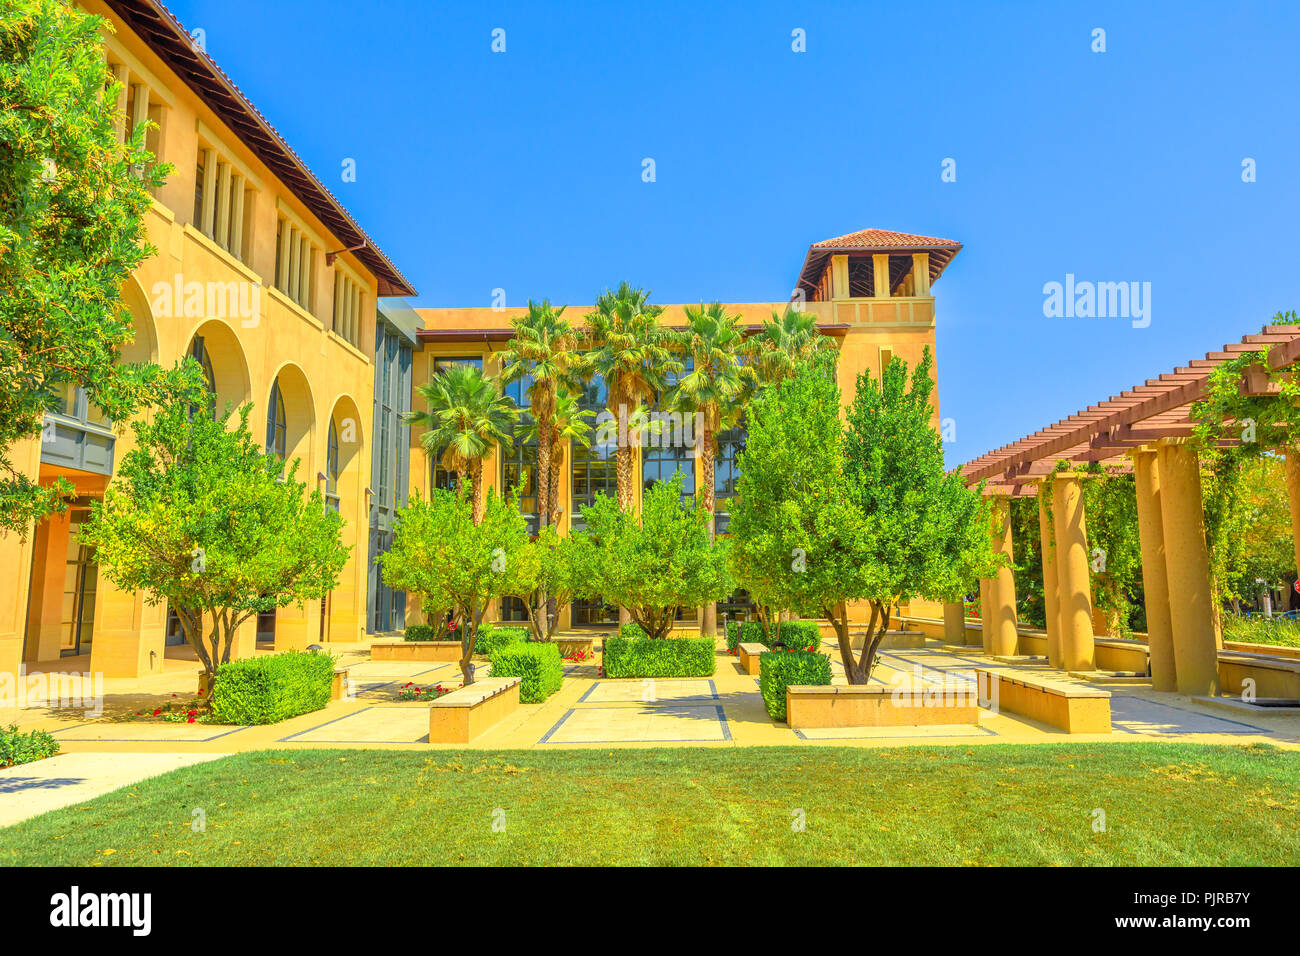 Palo Alto, California, United States - August 13, 2018: courtyard of SIEPR: Stanford Institute Economic Policy Research. Stanford University is one of the most prestigious universities in the world. Stock Photo